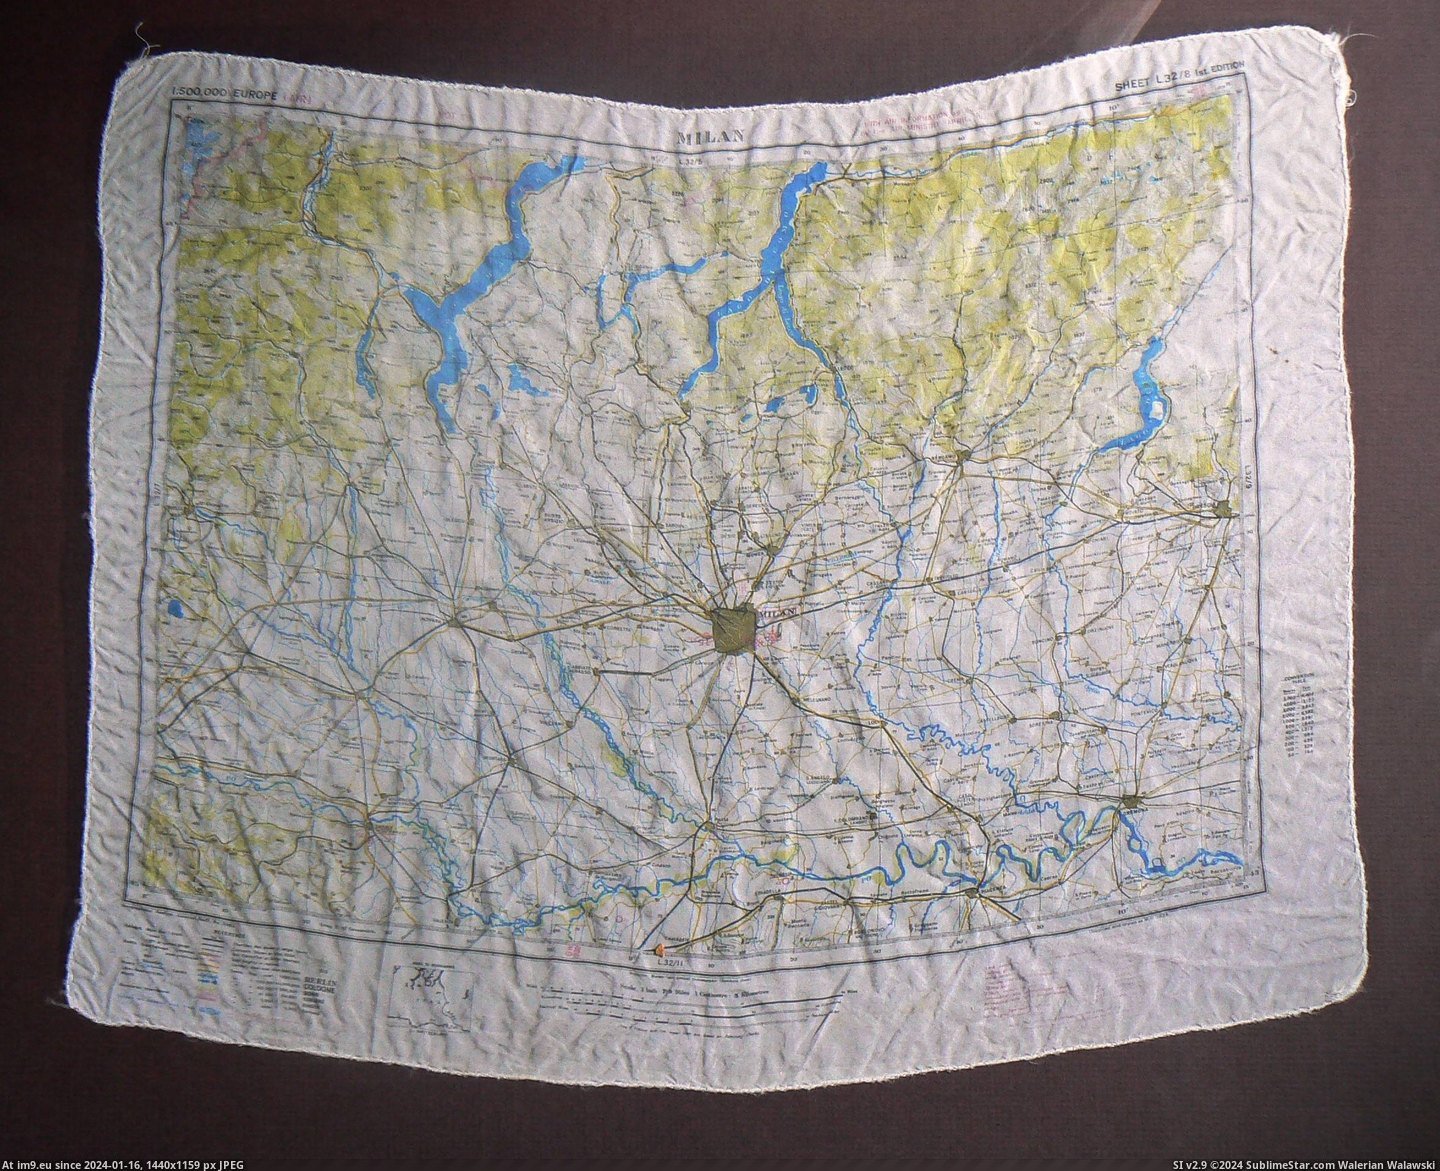 #Map #Area #Wwii #Silk #Escape #Milan [Mapporn] A WWII silk 'escape map' of the Milan area [2,355 x 1,908] Pic. (Image of album My r/MAPS favs))